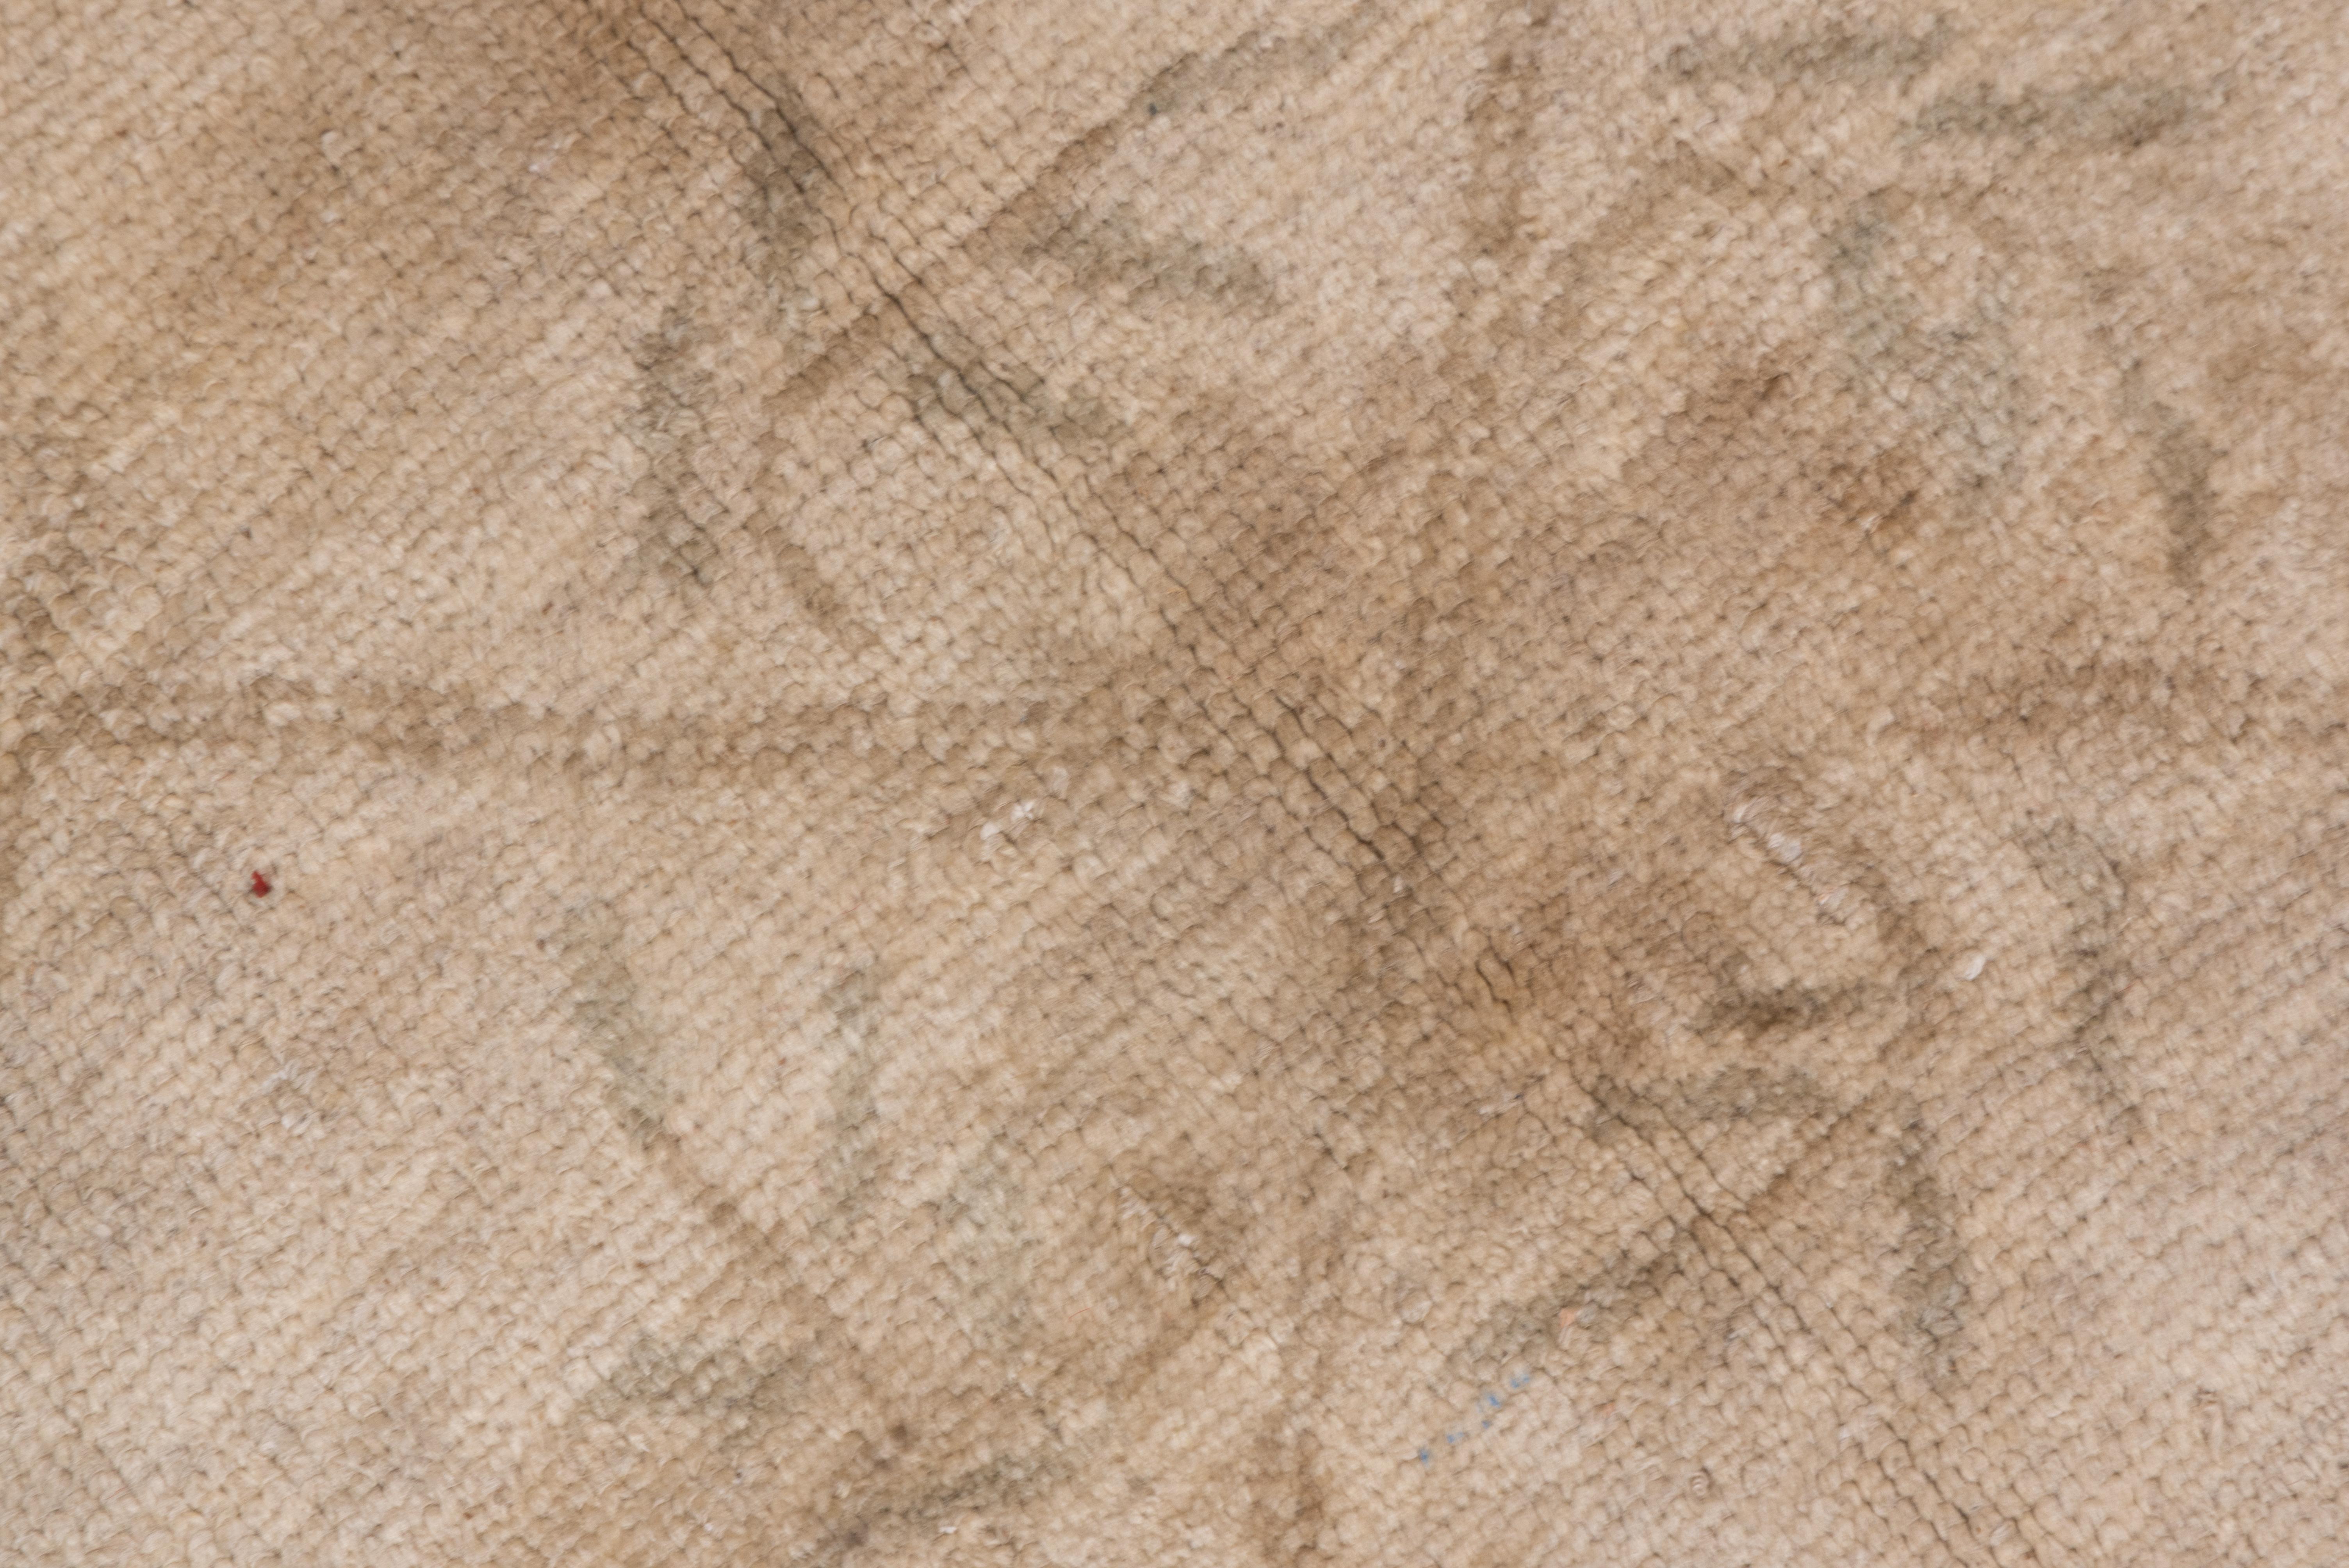 A tone-on-tone lattice and four-petal rosette pattern shows on the essentially borderless ground. A few elements appear in a light brown shade, but not consistently.